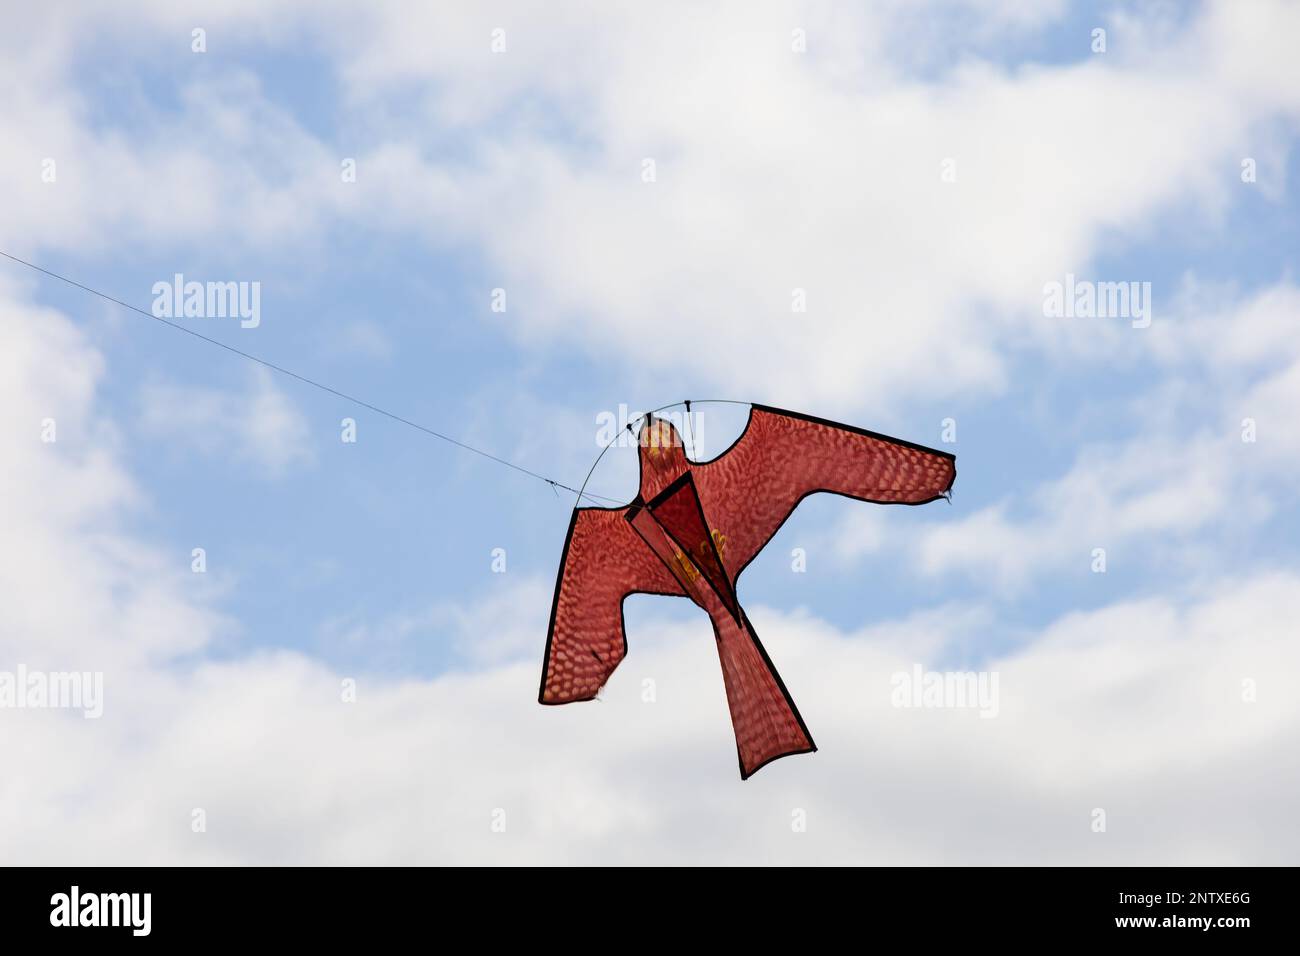 Bird scaring kite image of a hawk. Flying against cloudy blue sky. Stock Photo